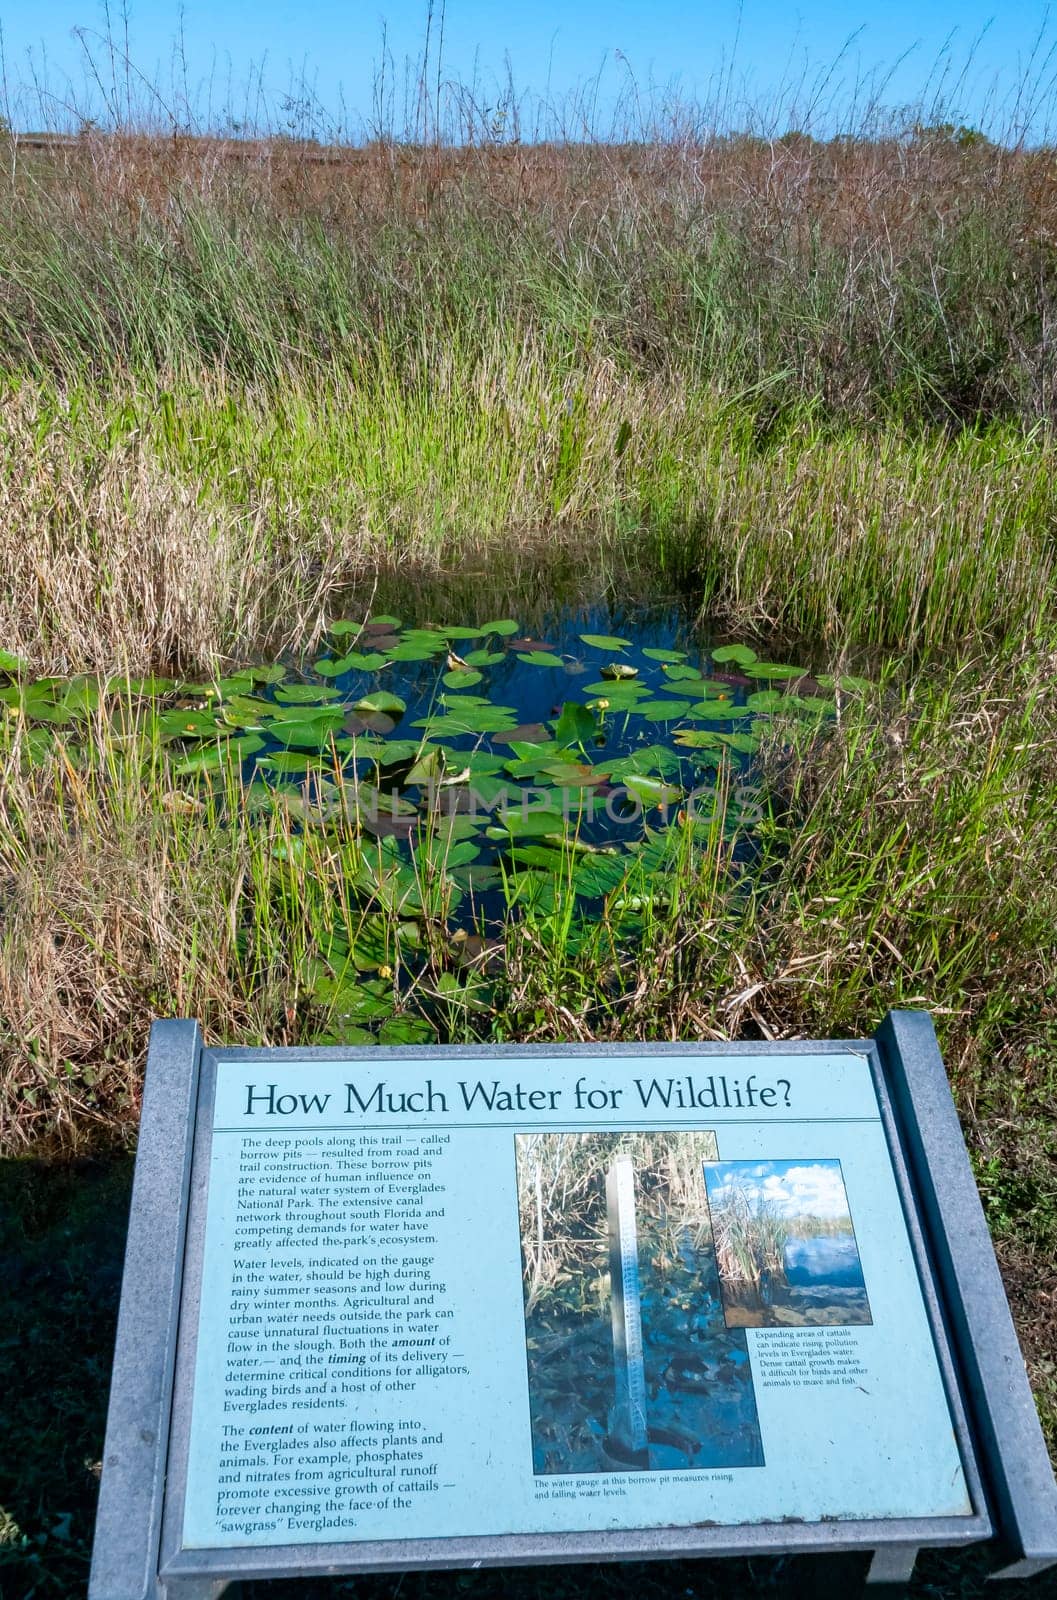 USA, FLORIDA - NOVEMBER 30, 2011: Informational sign "How Much Water for Wildlife?"with a national park with aquatic wetland vegetation, Florida